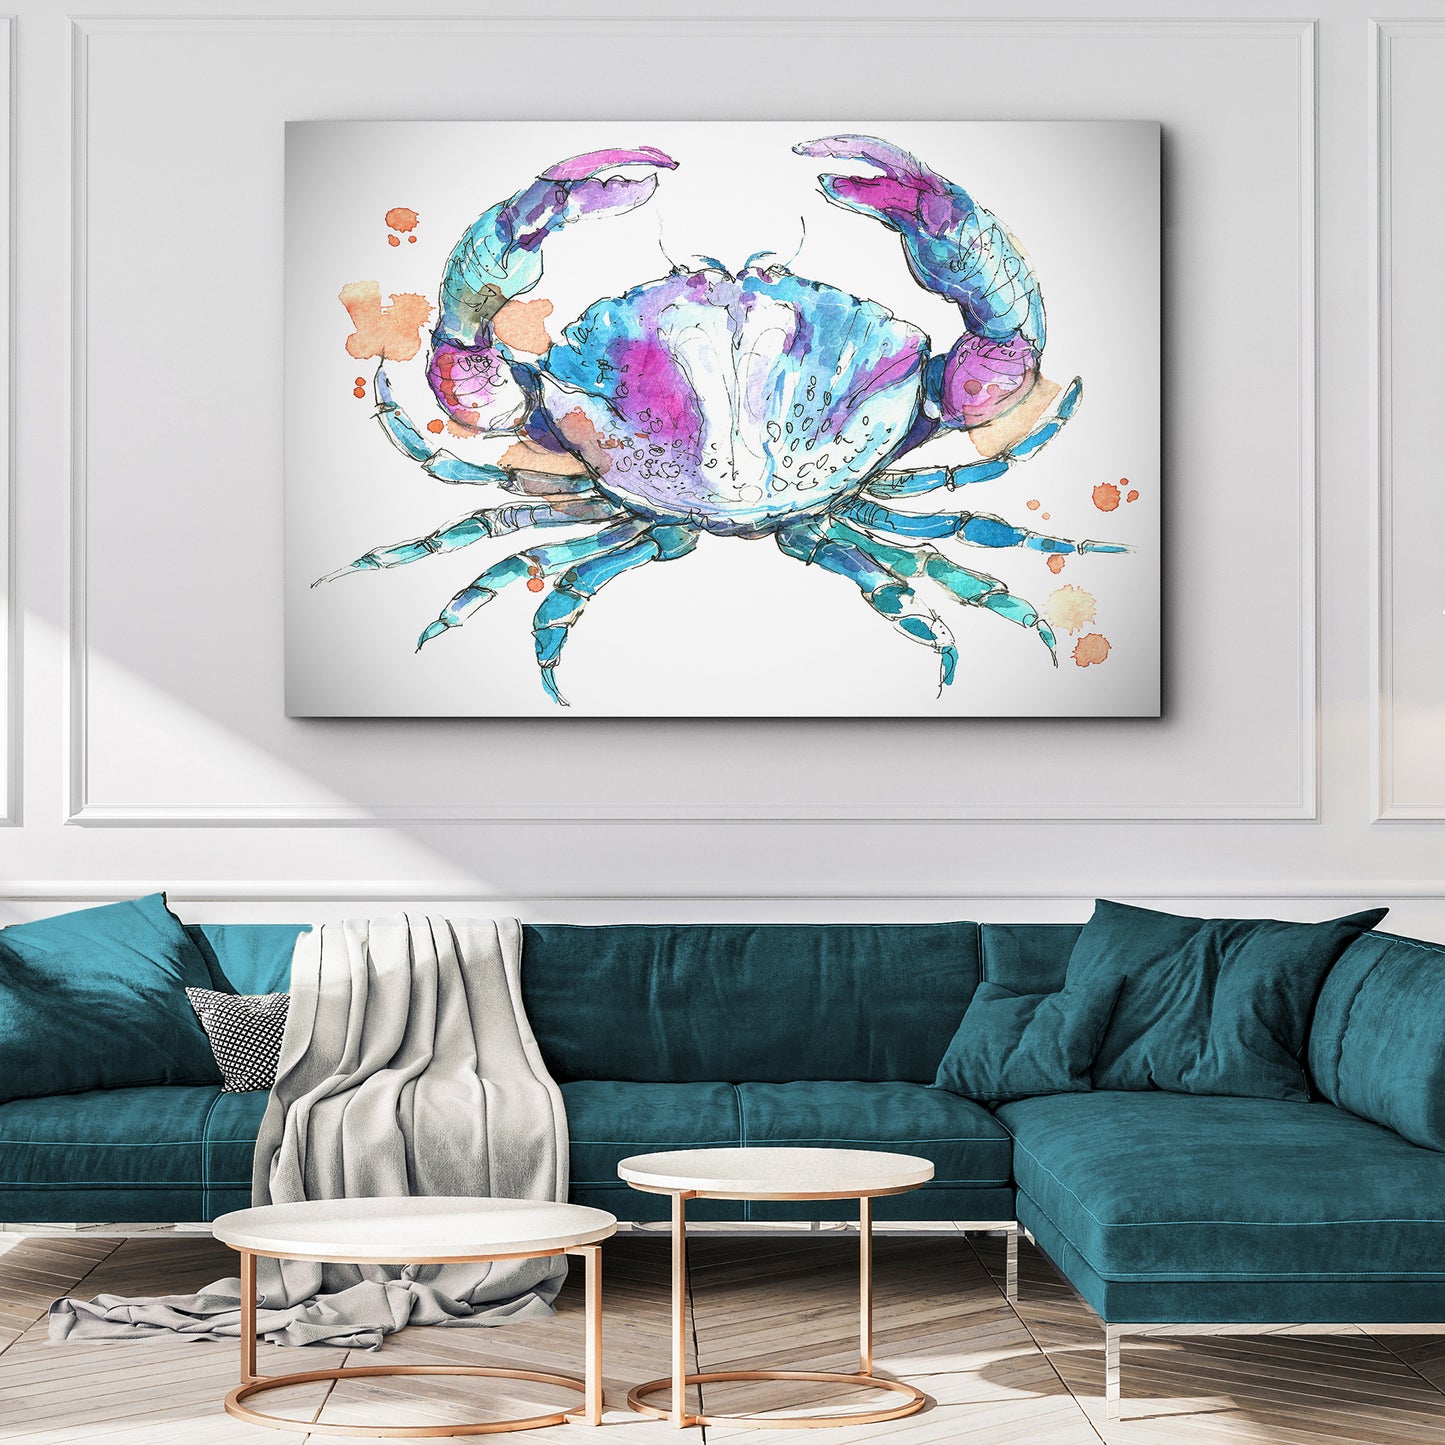 Coastal Crab Watercolor Canvas Wall Art - Image by Tailored Canvases